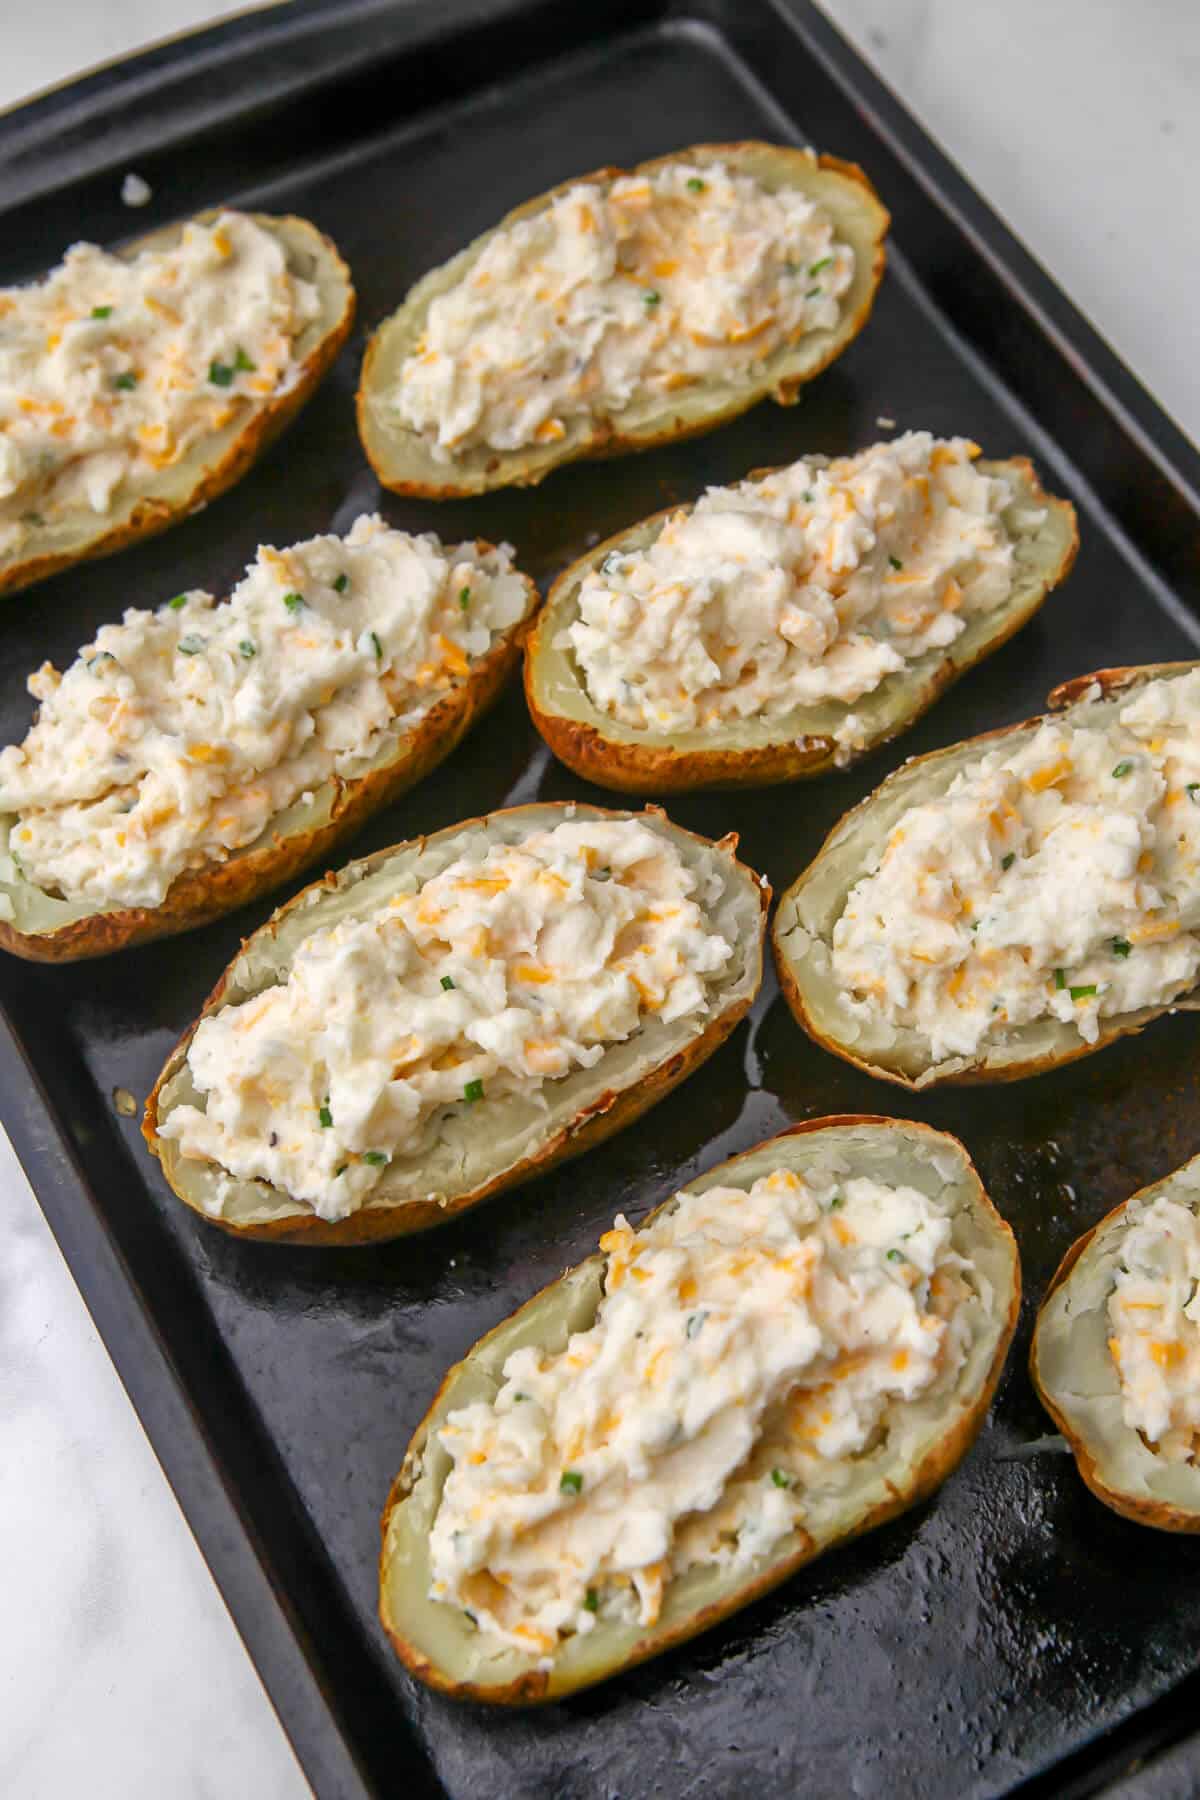 Vegan twice baked potatoes before they are baked.